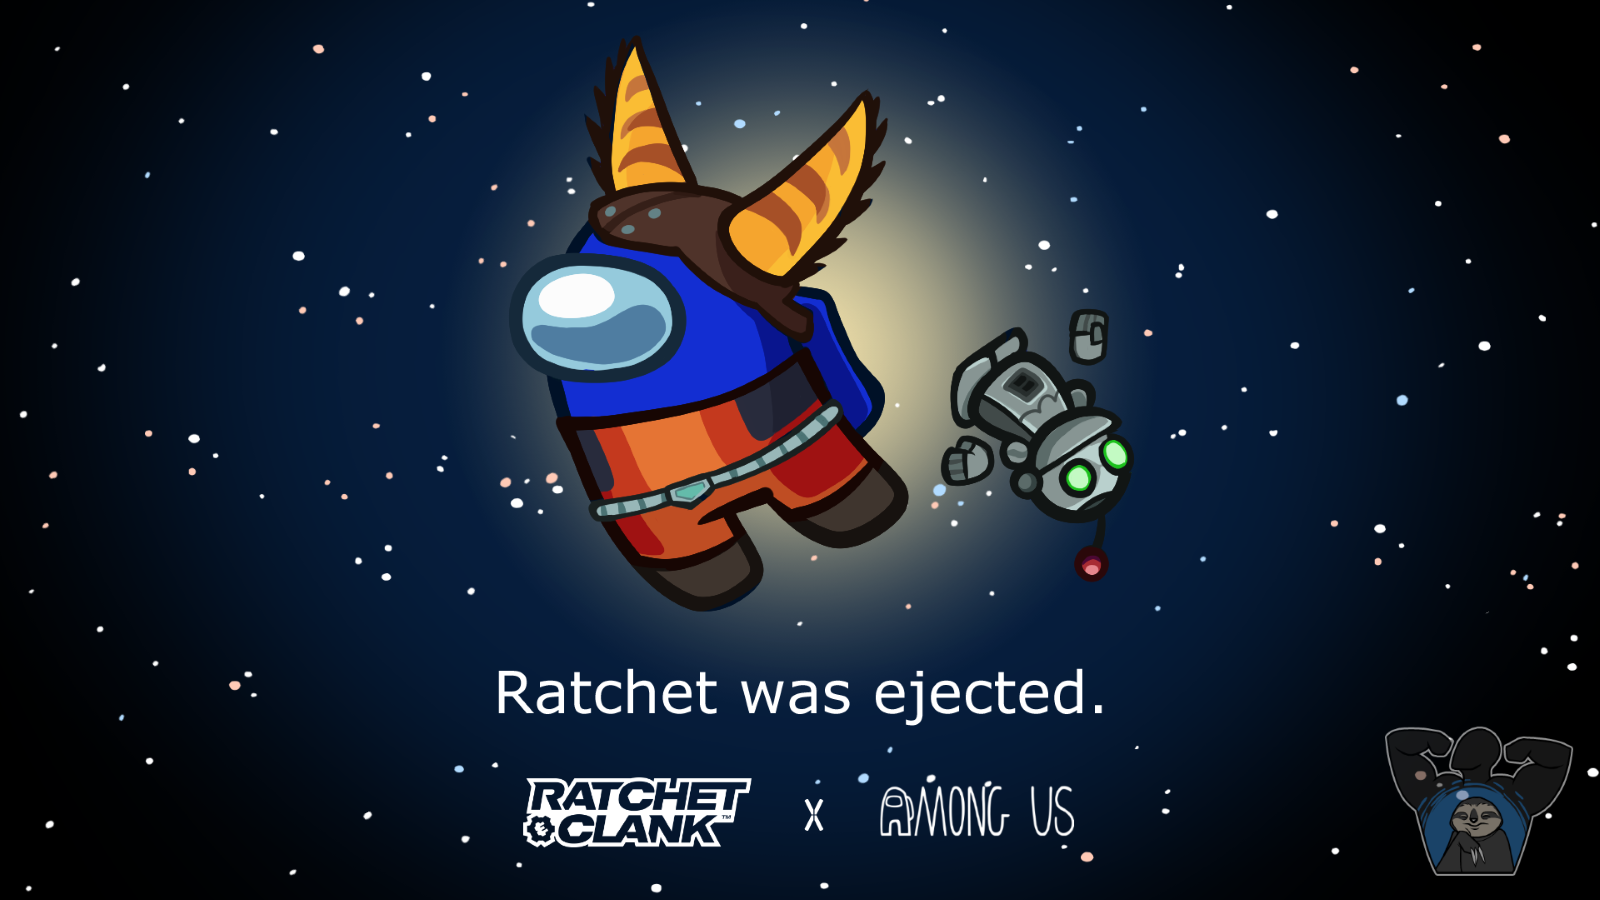 Announcing: Among Us x Ratchet & Clank Cosmetics!